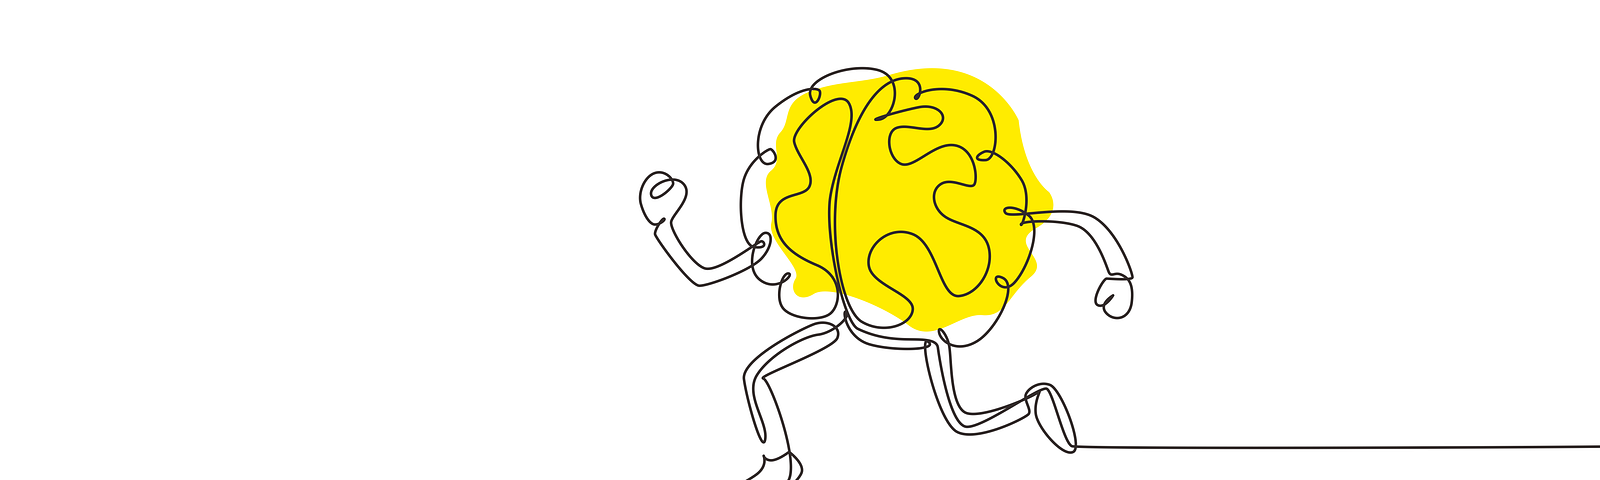 An illustration of human brain trying to catch up with technology